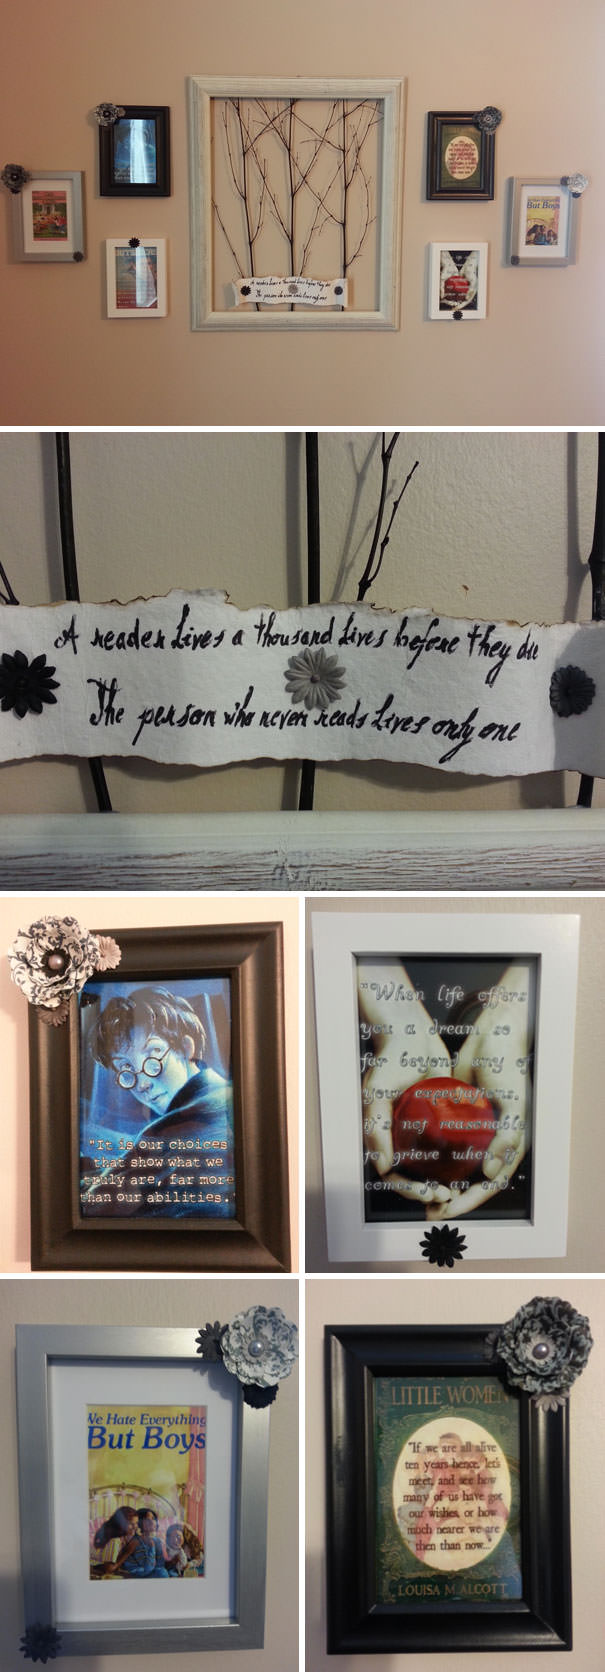 I made this for my wife, all of her favorite childhood and young adult books with memorable quotes plus a nice George R.R. Martin quote to tie it all together. Think she'll like it?